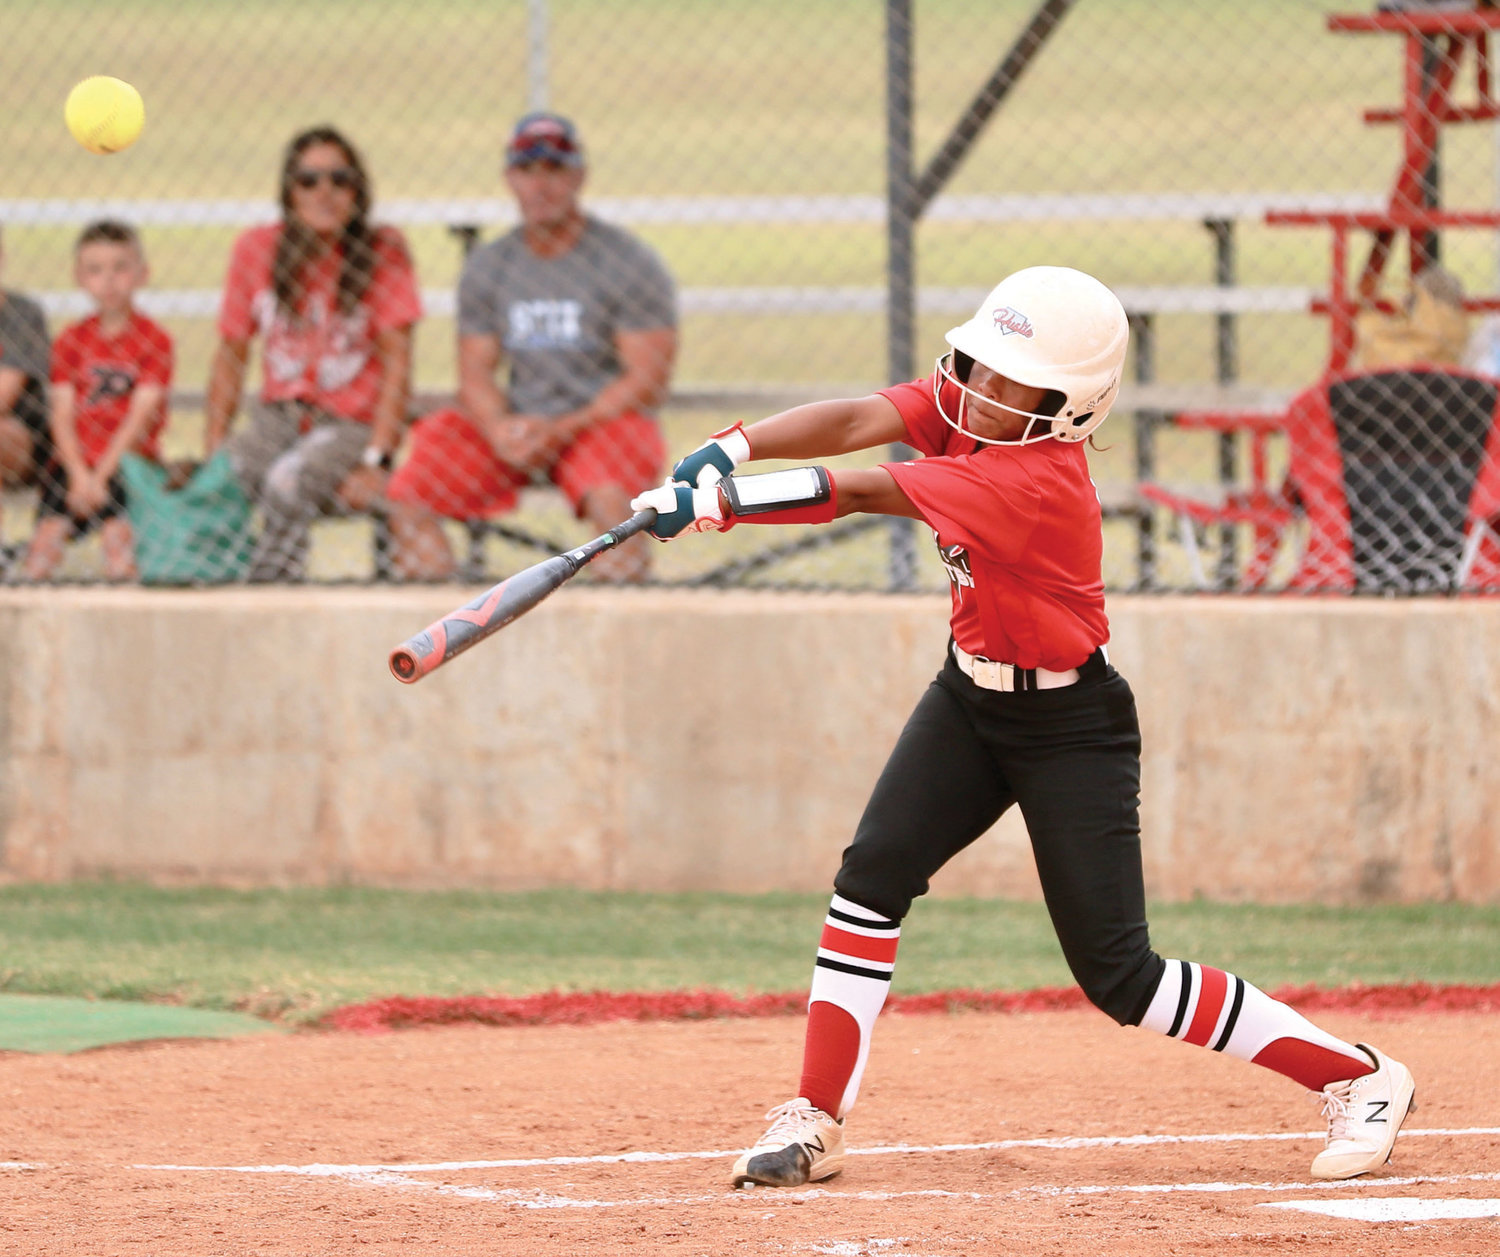 Purcell freshman Coty Sessions watches a ball off her bat in what would eventually lead to a three-run bonanza for the Dragons. Purcell heads to Tuttle today (Thursday) before heading into the Plainview tournament this weekend.